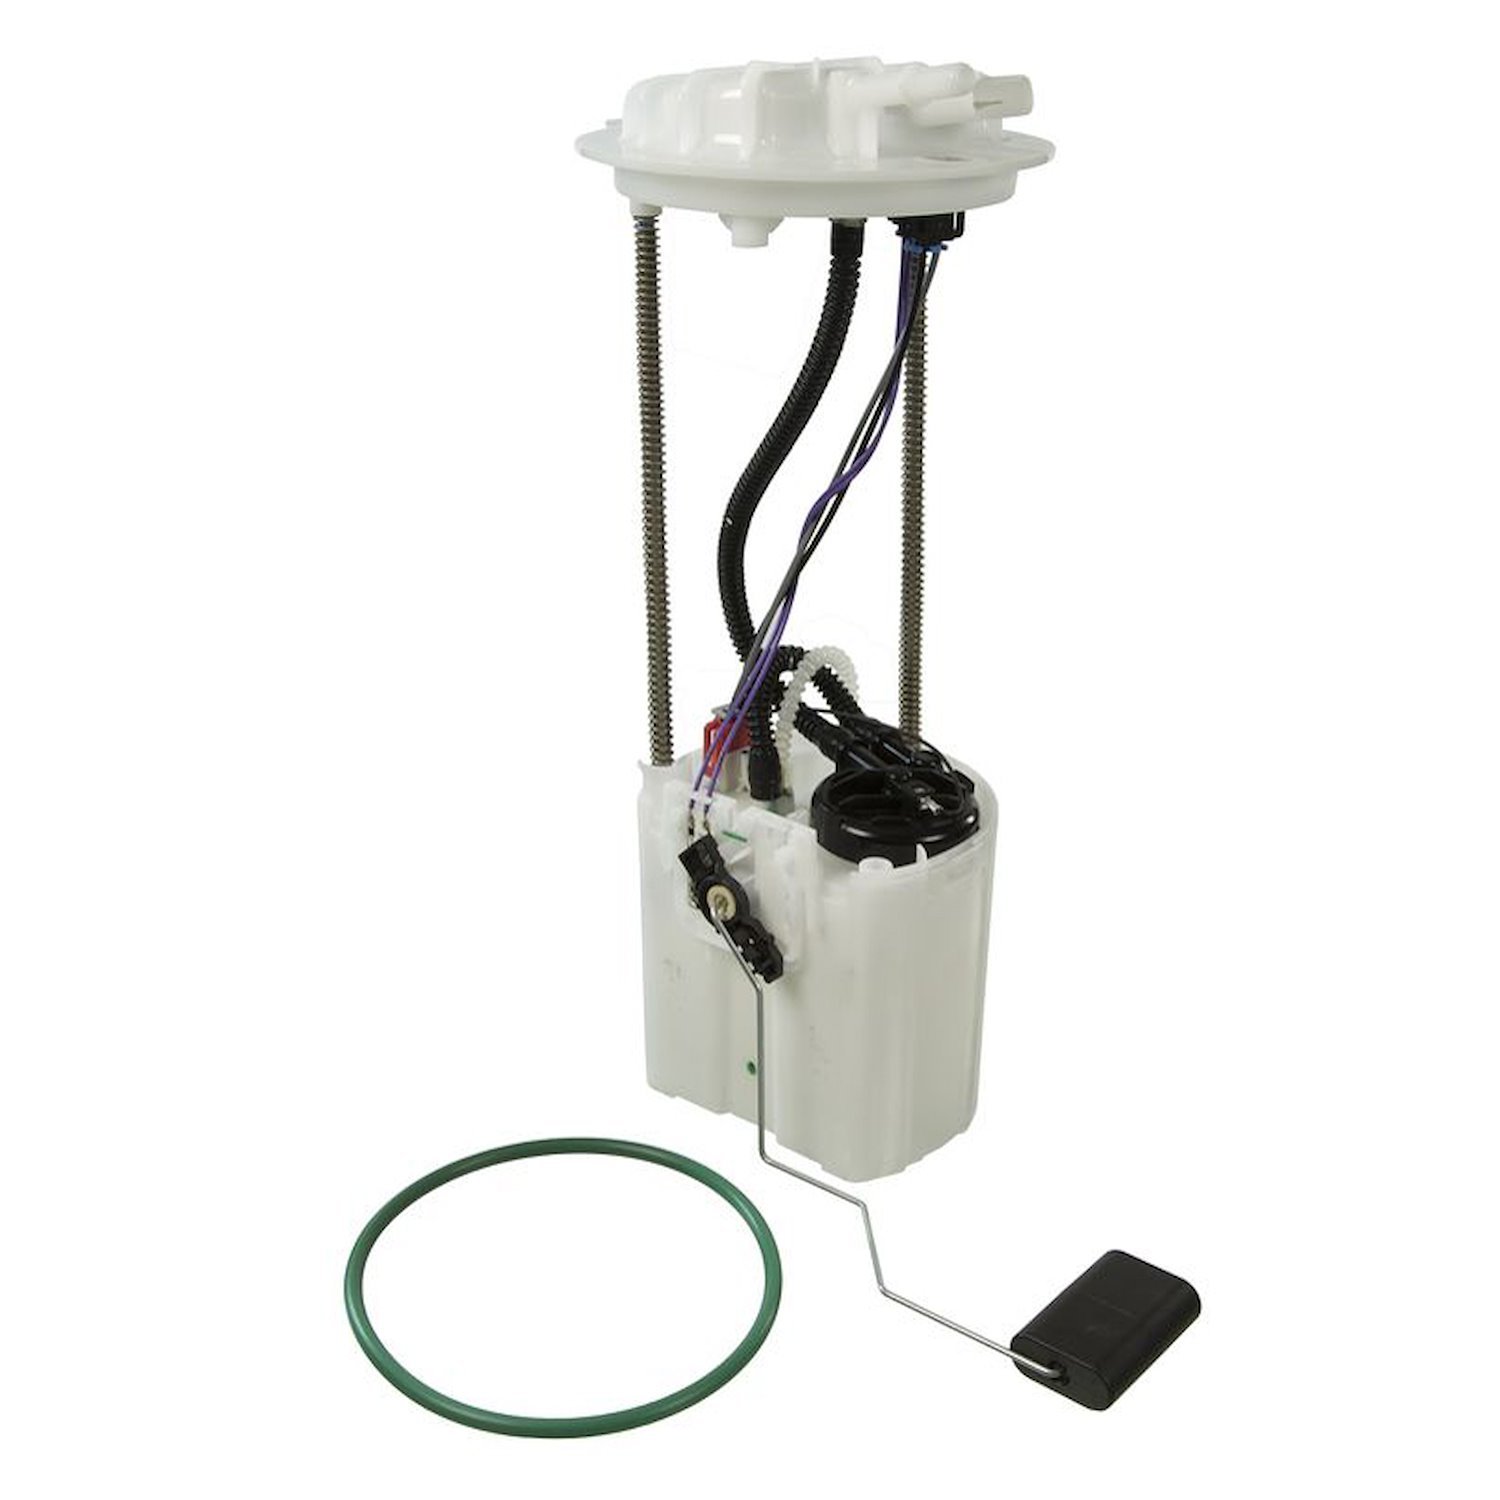 OE Chrysler/Dodge Replacement Fuel Pump Module Assembly for